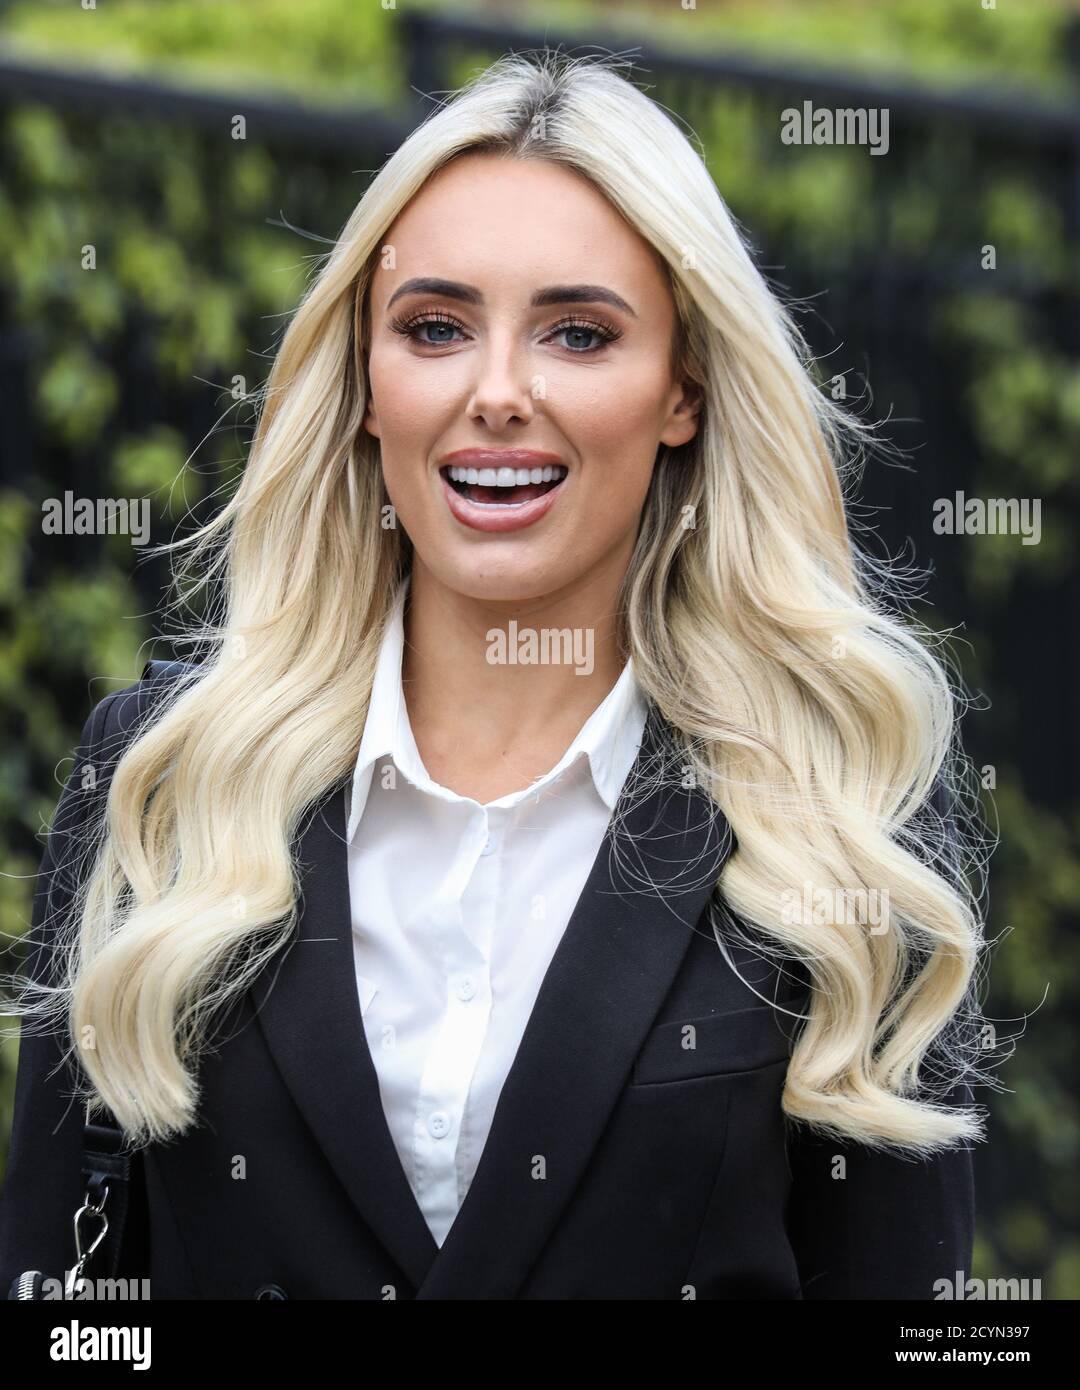 Amber Turner, Photocall, Envy Shoes, Londra, Regno Unito, 01 ottobre 2020, Photo by piQtured Foto Stock